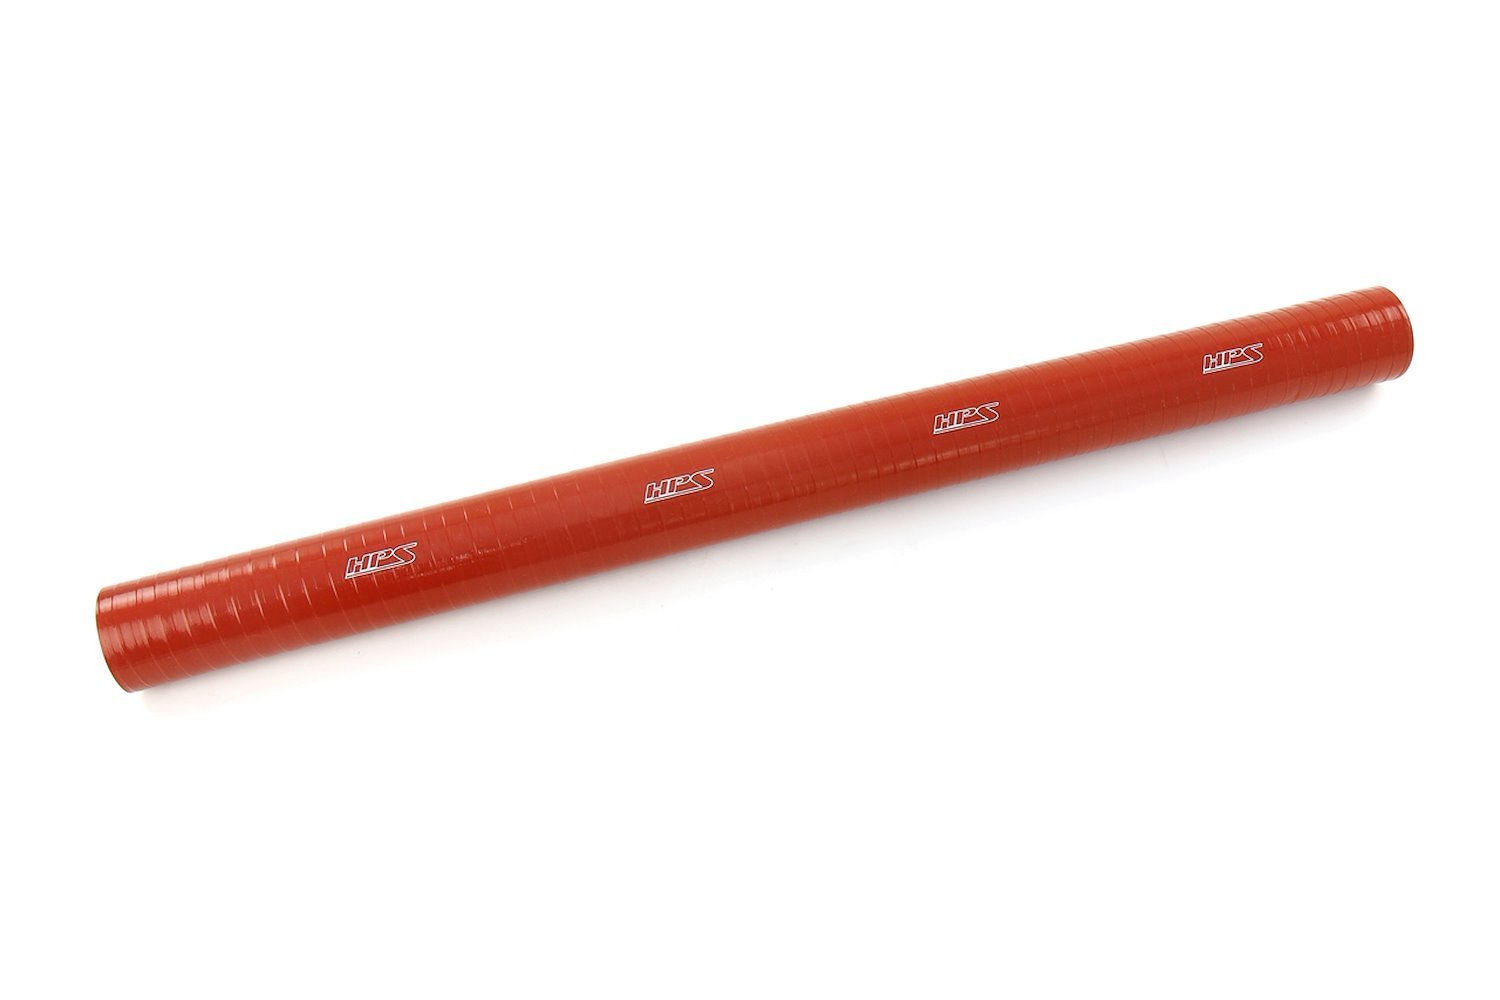 ST-3F-075-HOT Silicone Coolant Tube, Ultra High-Temp 4-Ply Reinforced, 3/4 in. ID, 3 ft. Long